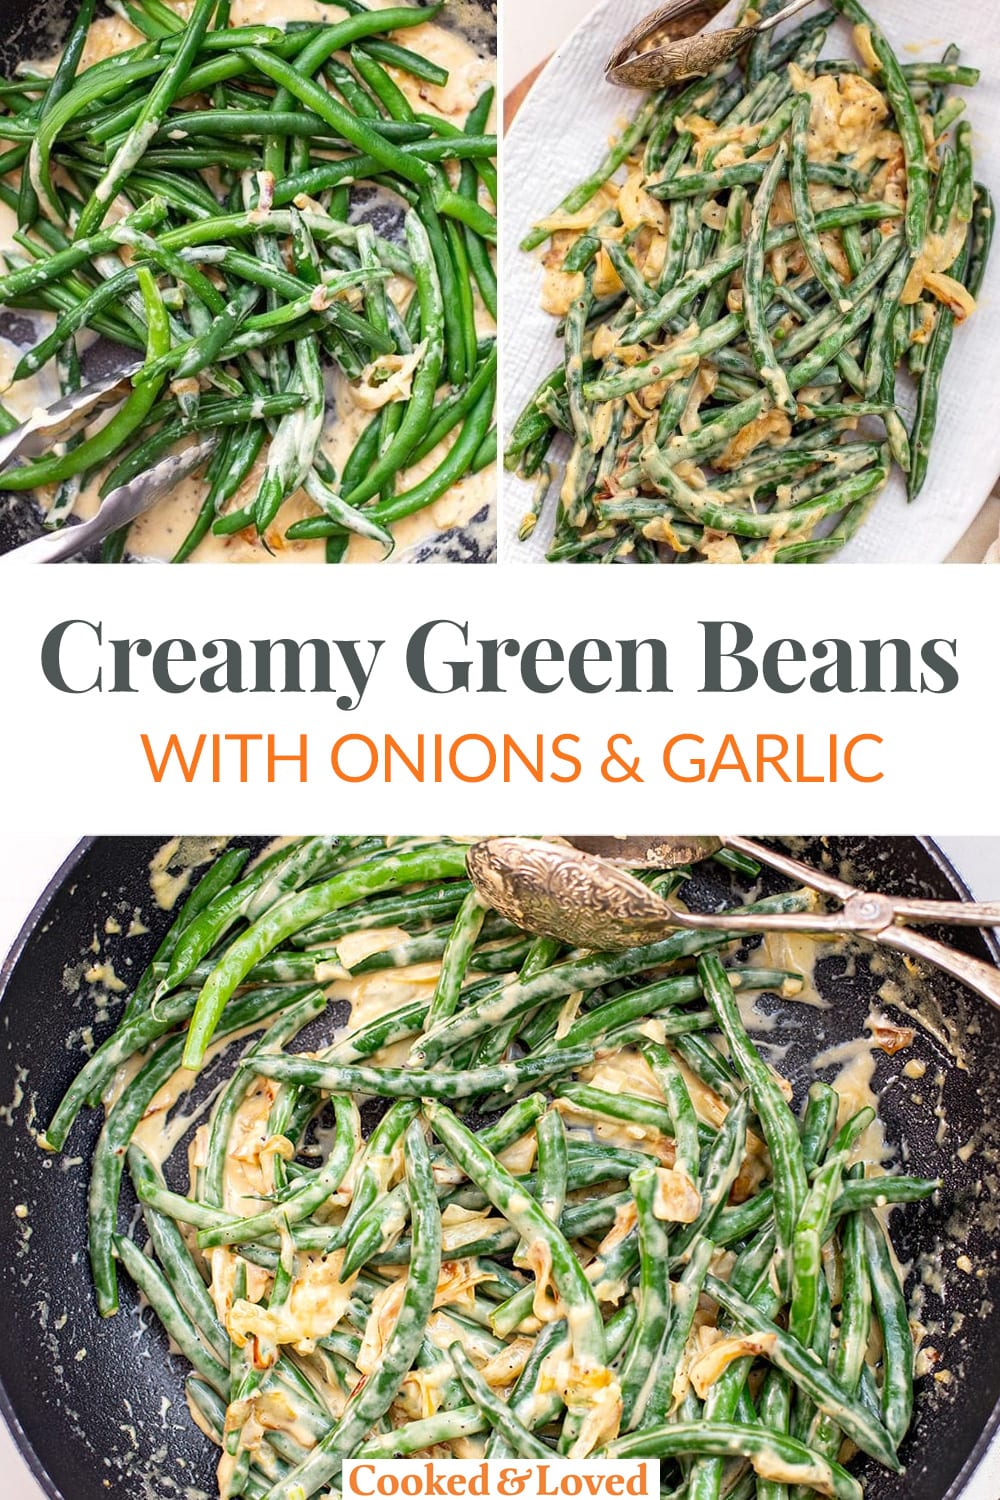 Creamy Green Beans With Onions & Garlic